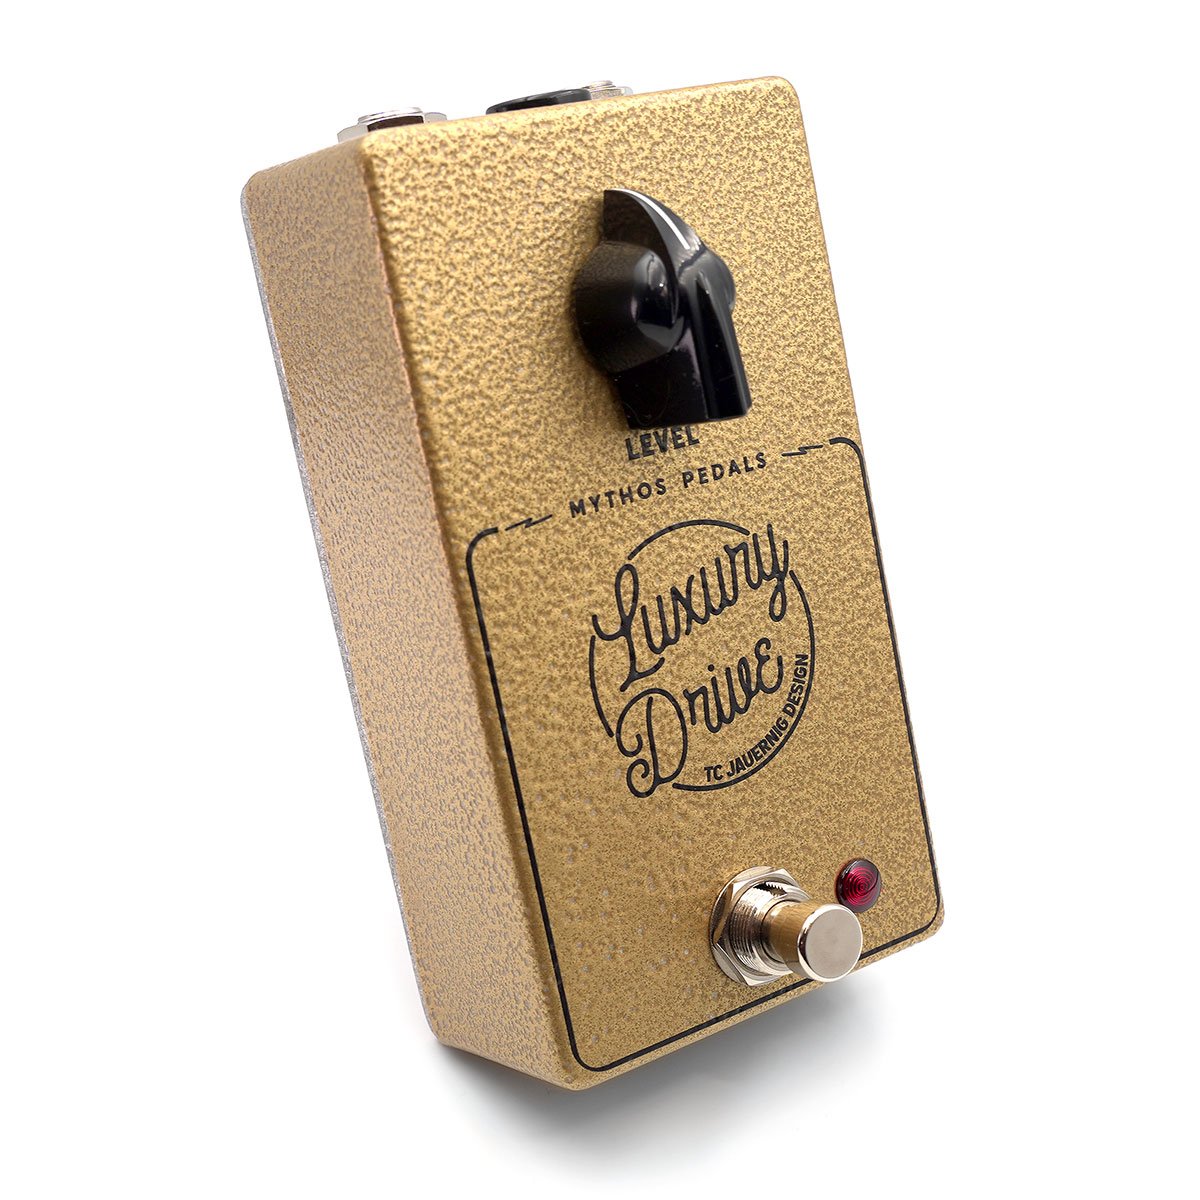 【Lovepedal】High power tweed twin オンラインストアサイト - reliable-sourcing.com